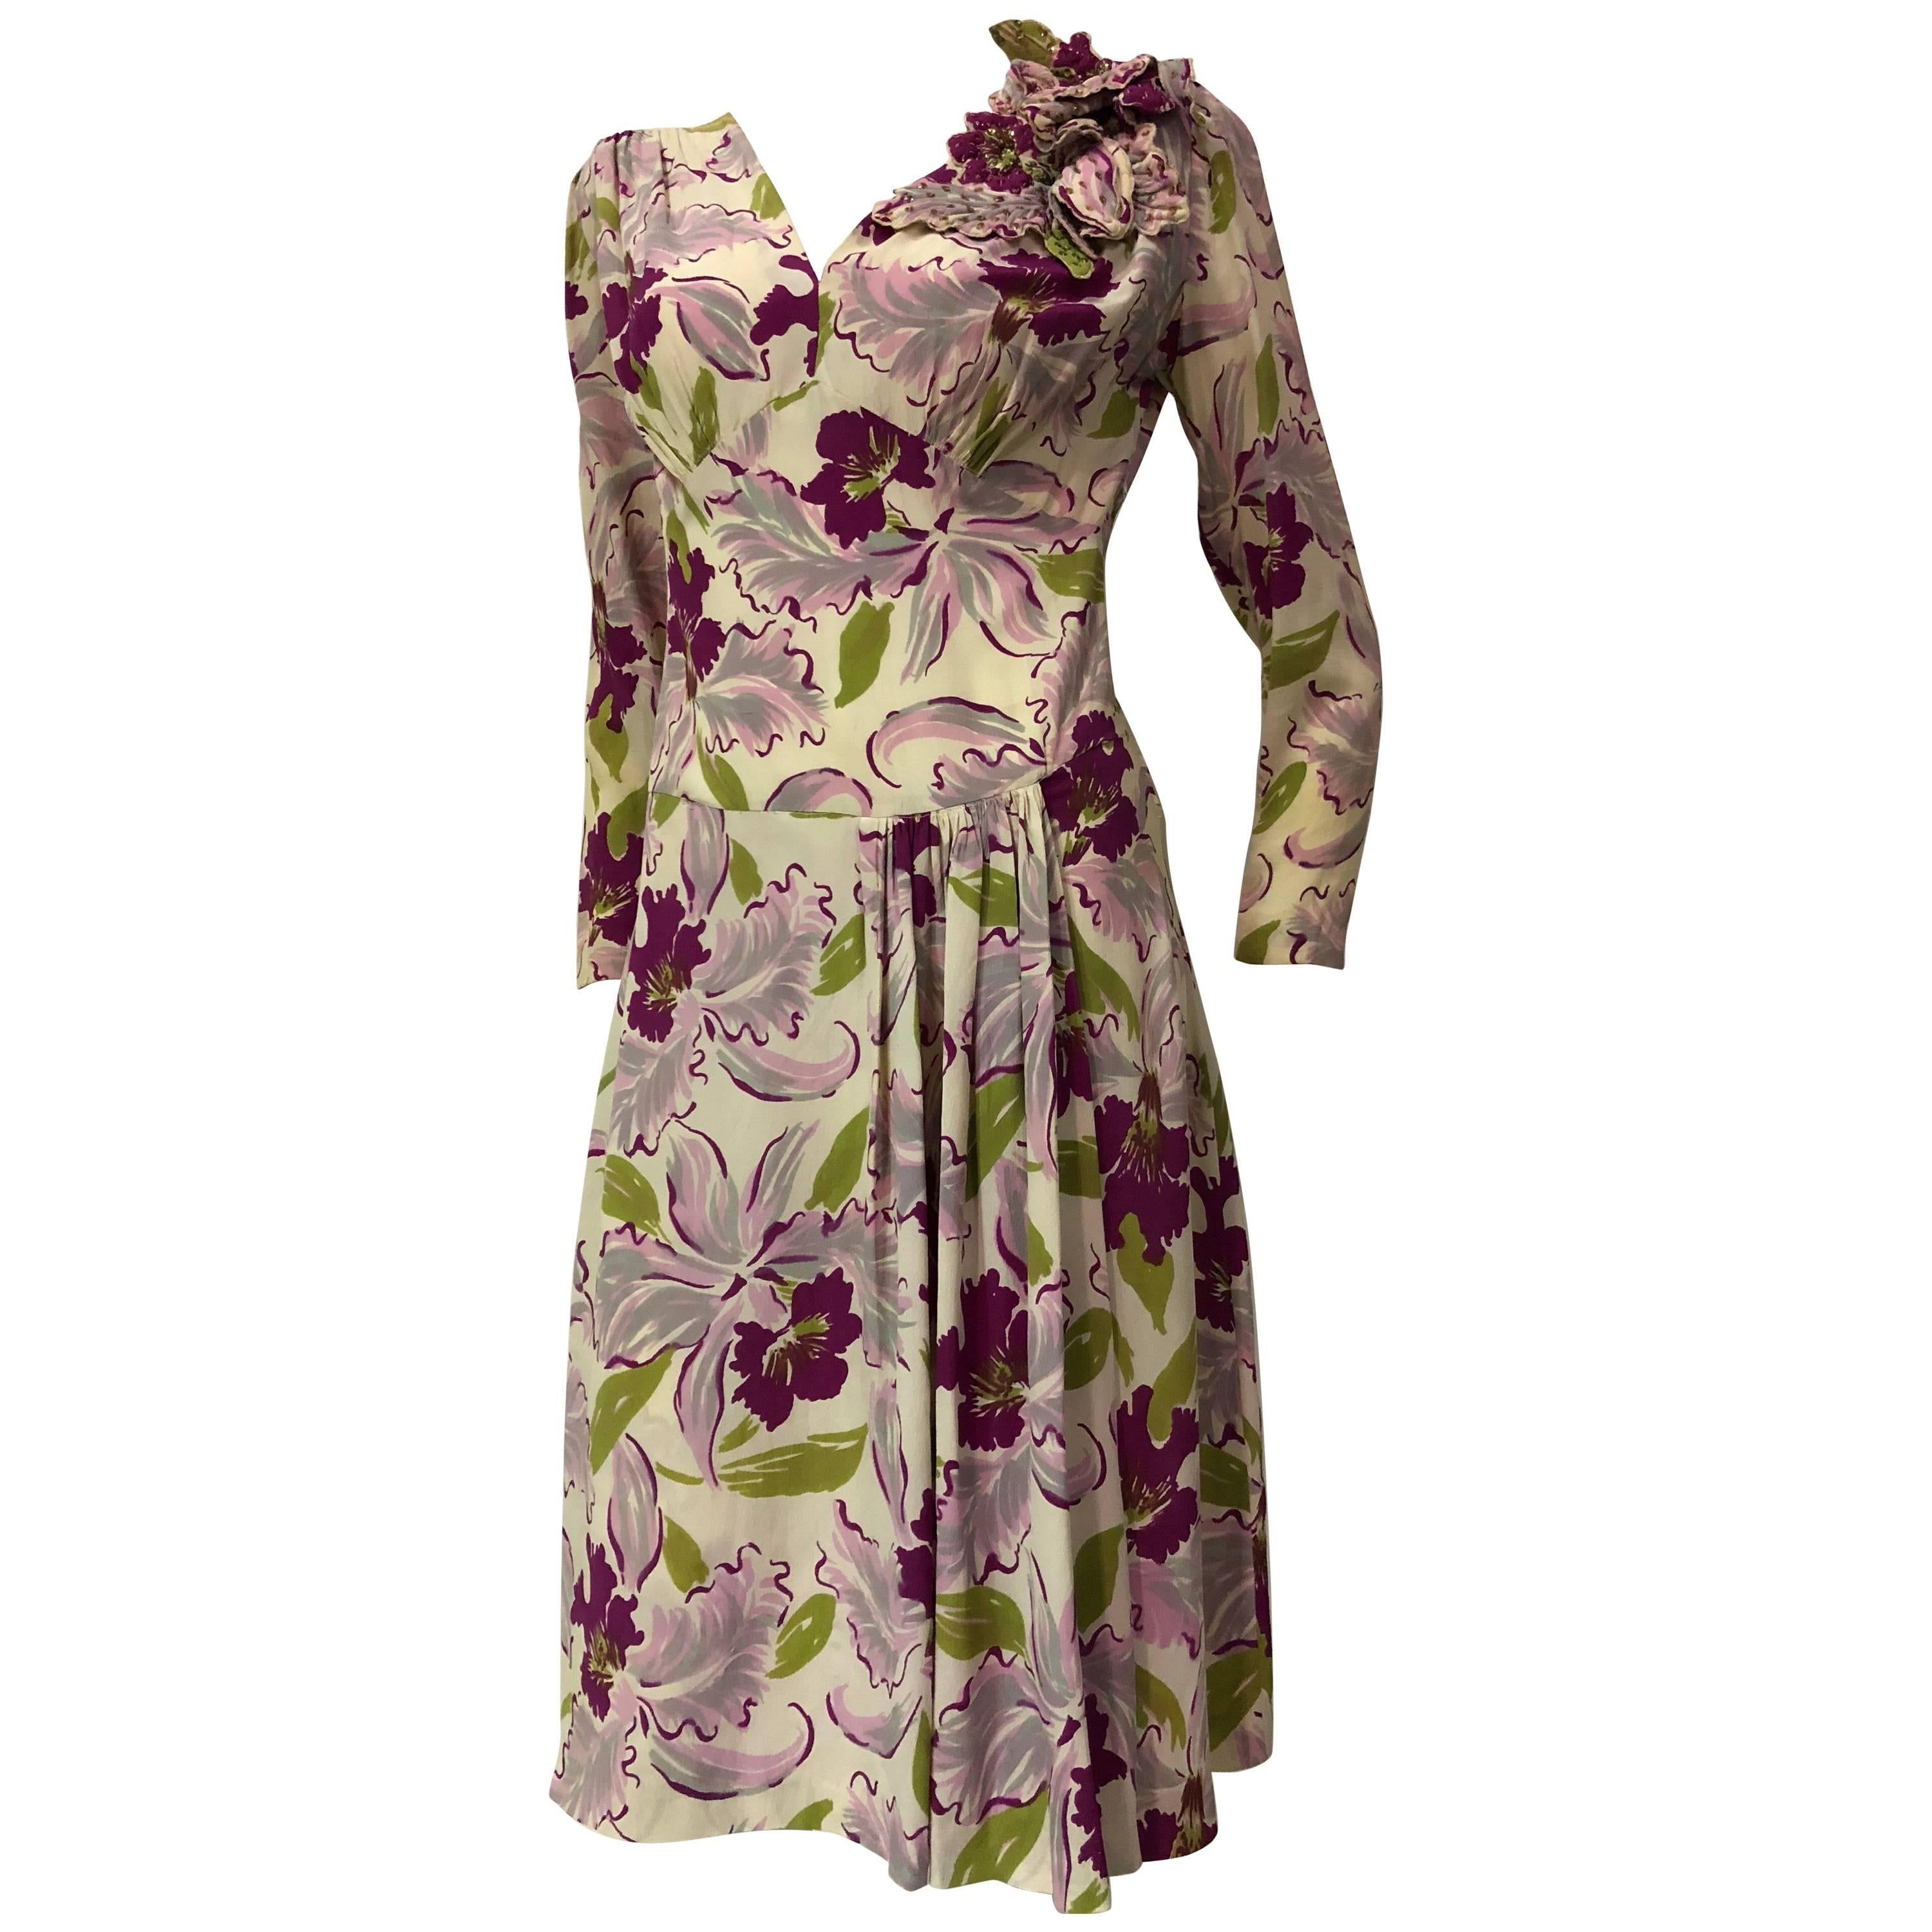 1940s Orchid Print Rayon Crepe Dress W/ Dramatic Orchid Corsage